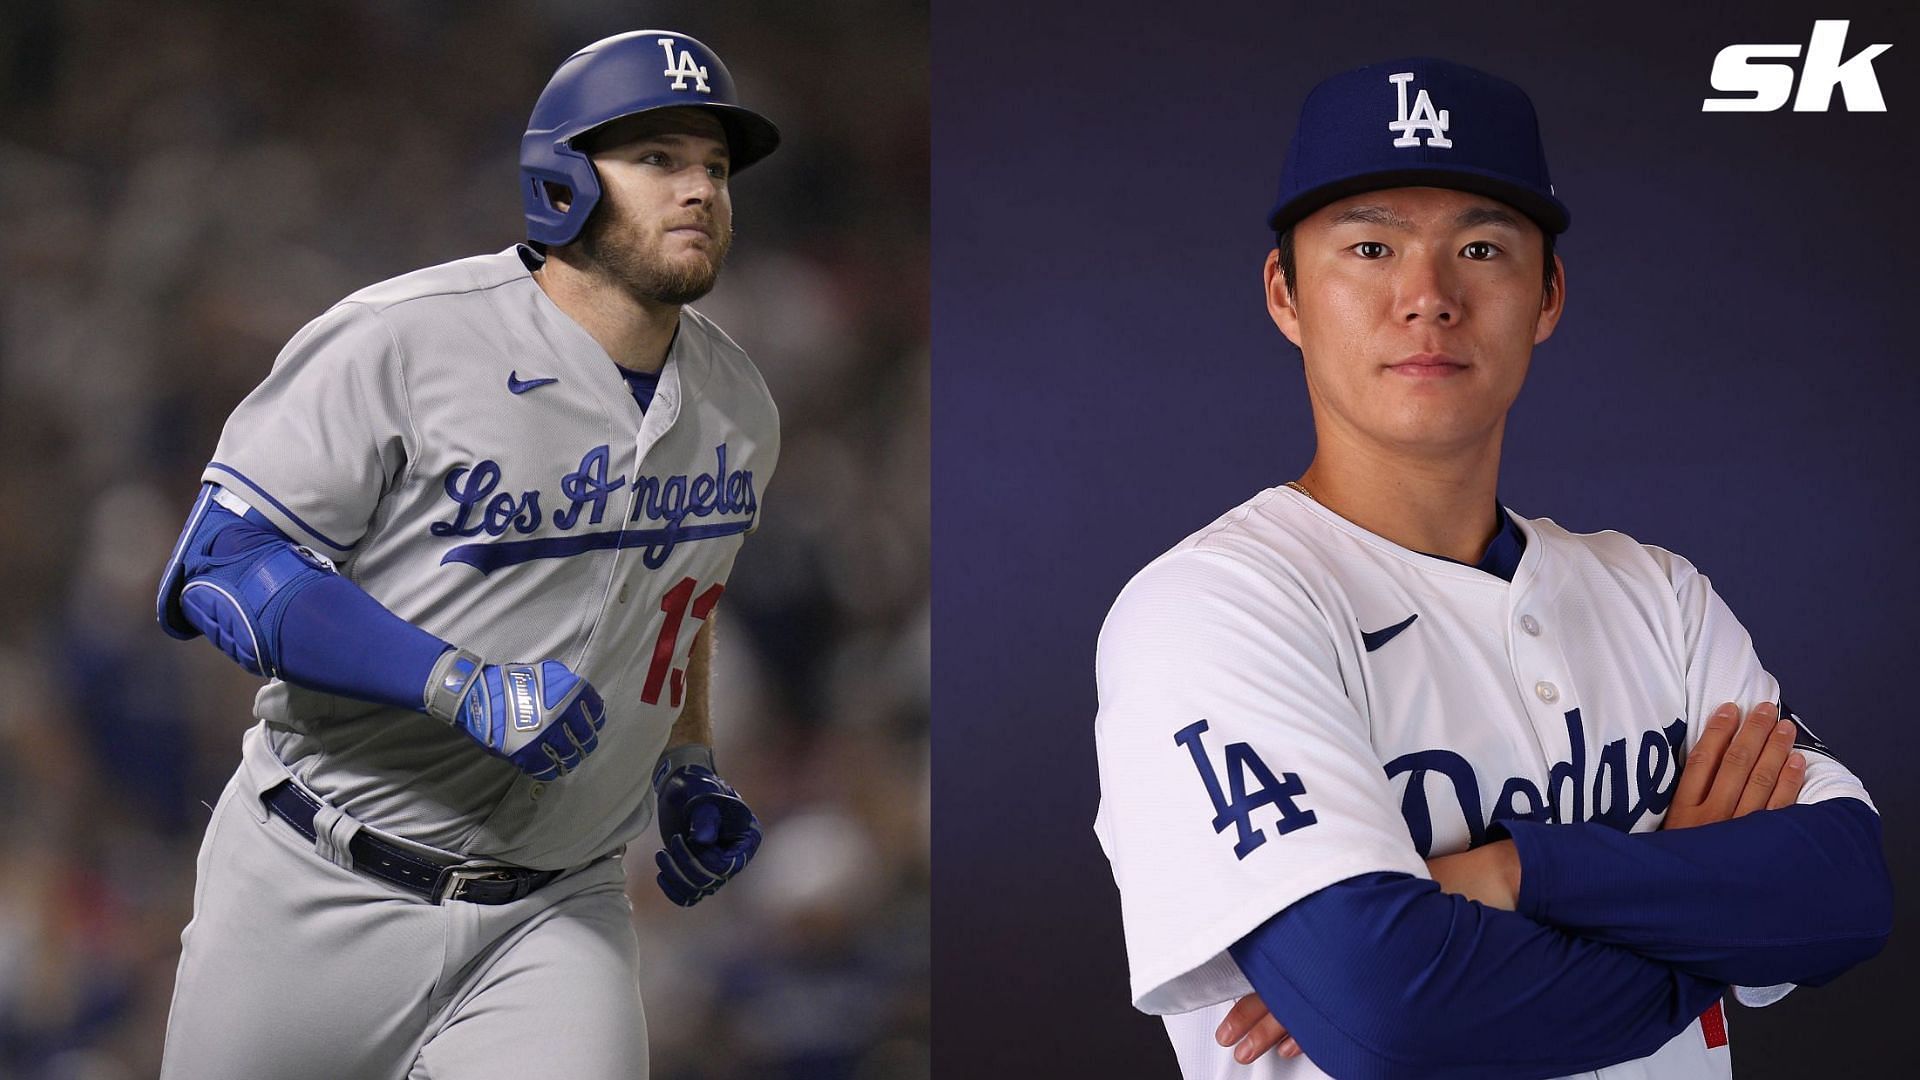 MLB News Today: Yamamoto excellent in Spring Training debut; Max Muncy avoids major injury following HBP